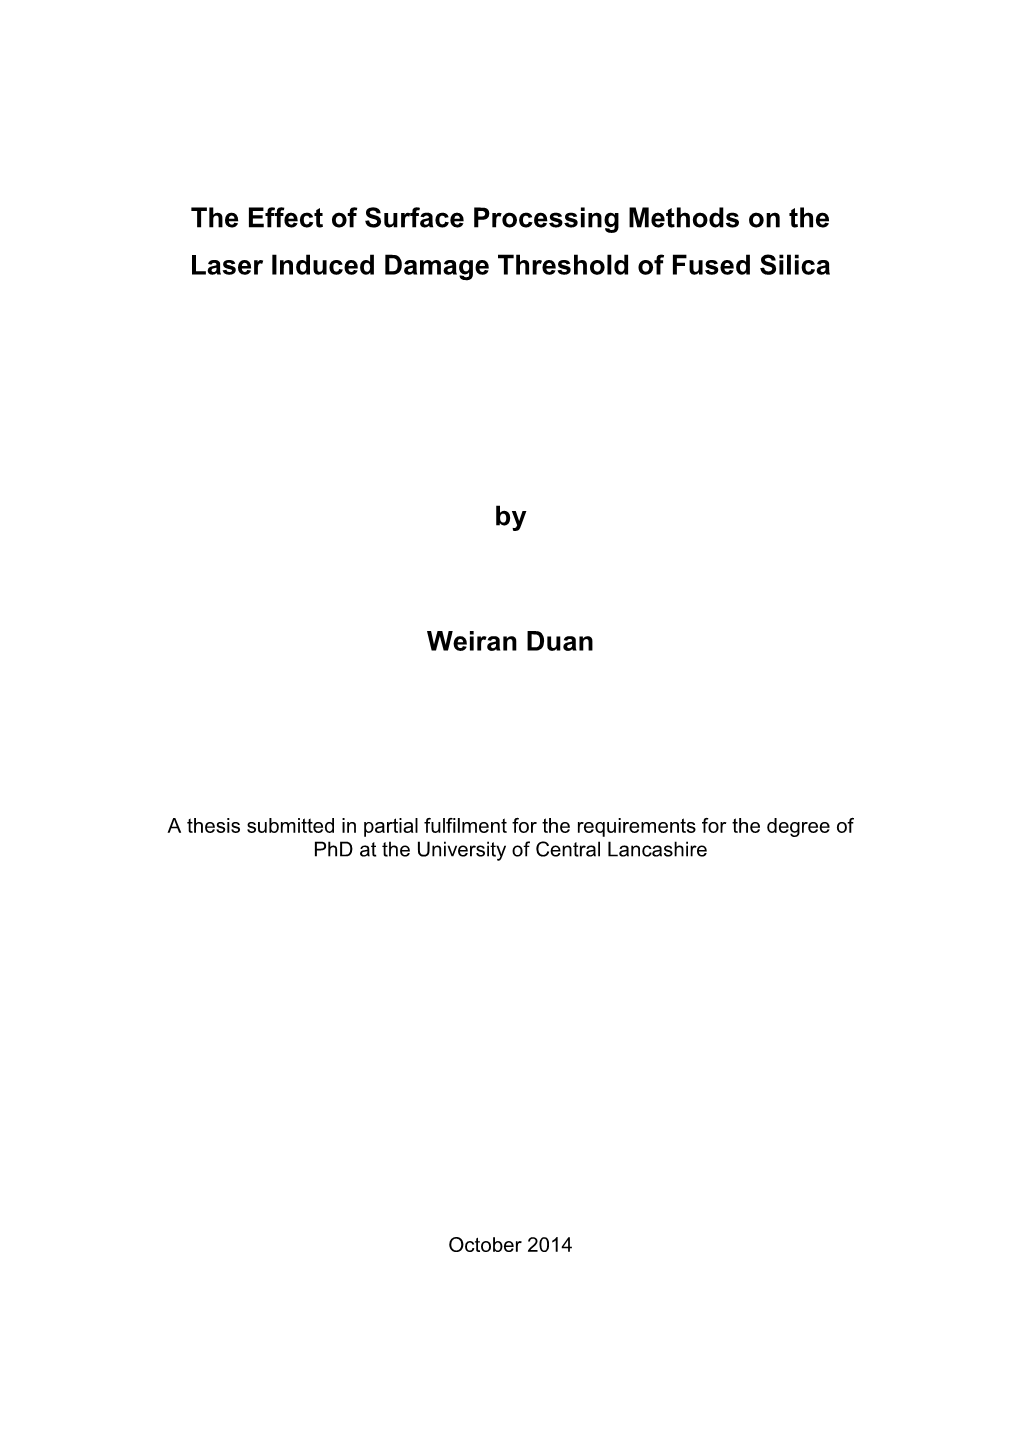 The Effect of Surface Processing Methods on the Laser Induced Damage Threshold of Fused Silica